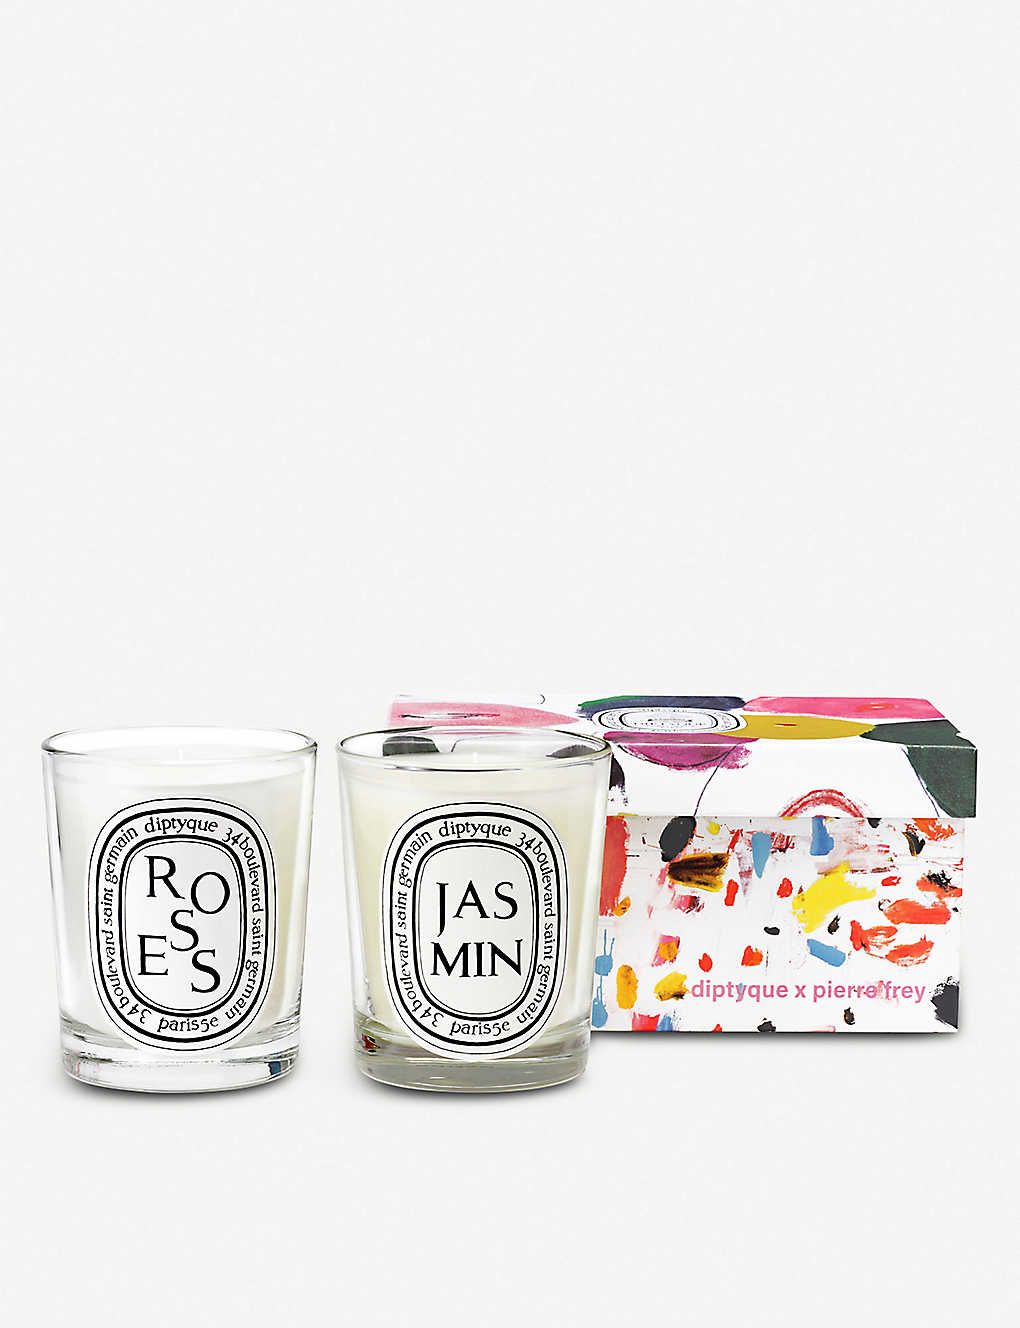 DIPTYQUE
			
			
				Rose and Jasmine scented candle set of two
			
		


		
	
		
		
			
							
	... | Selfridges